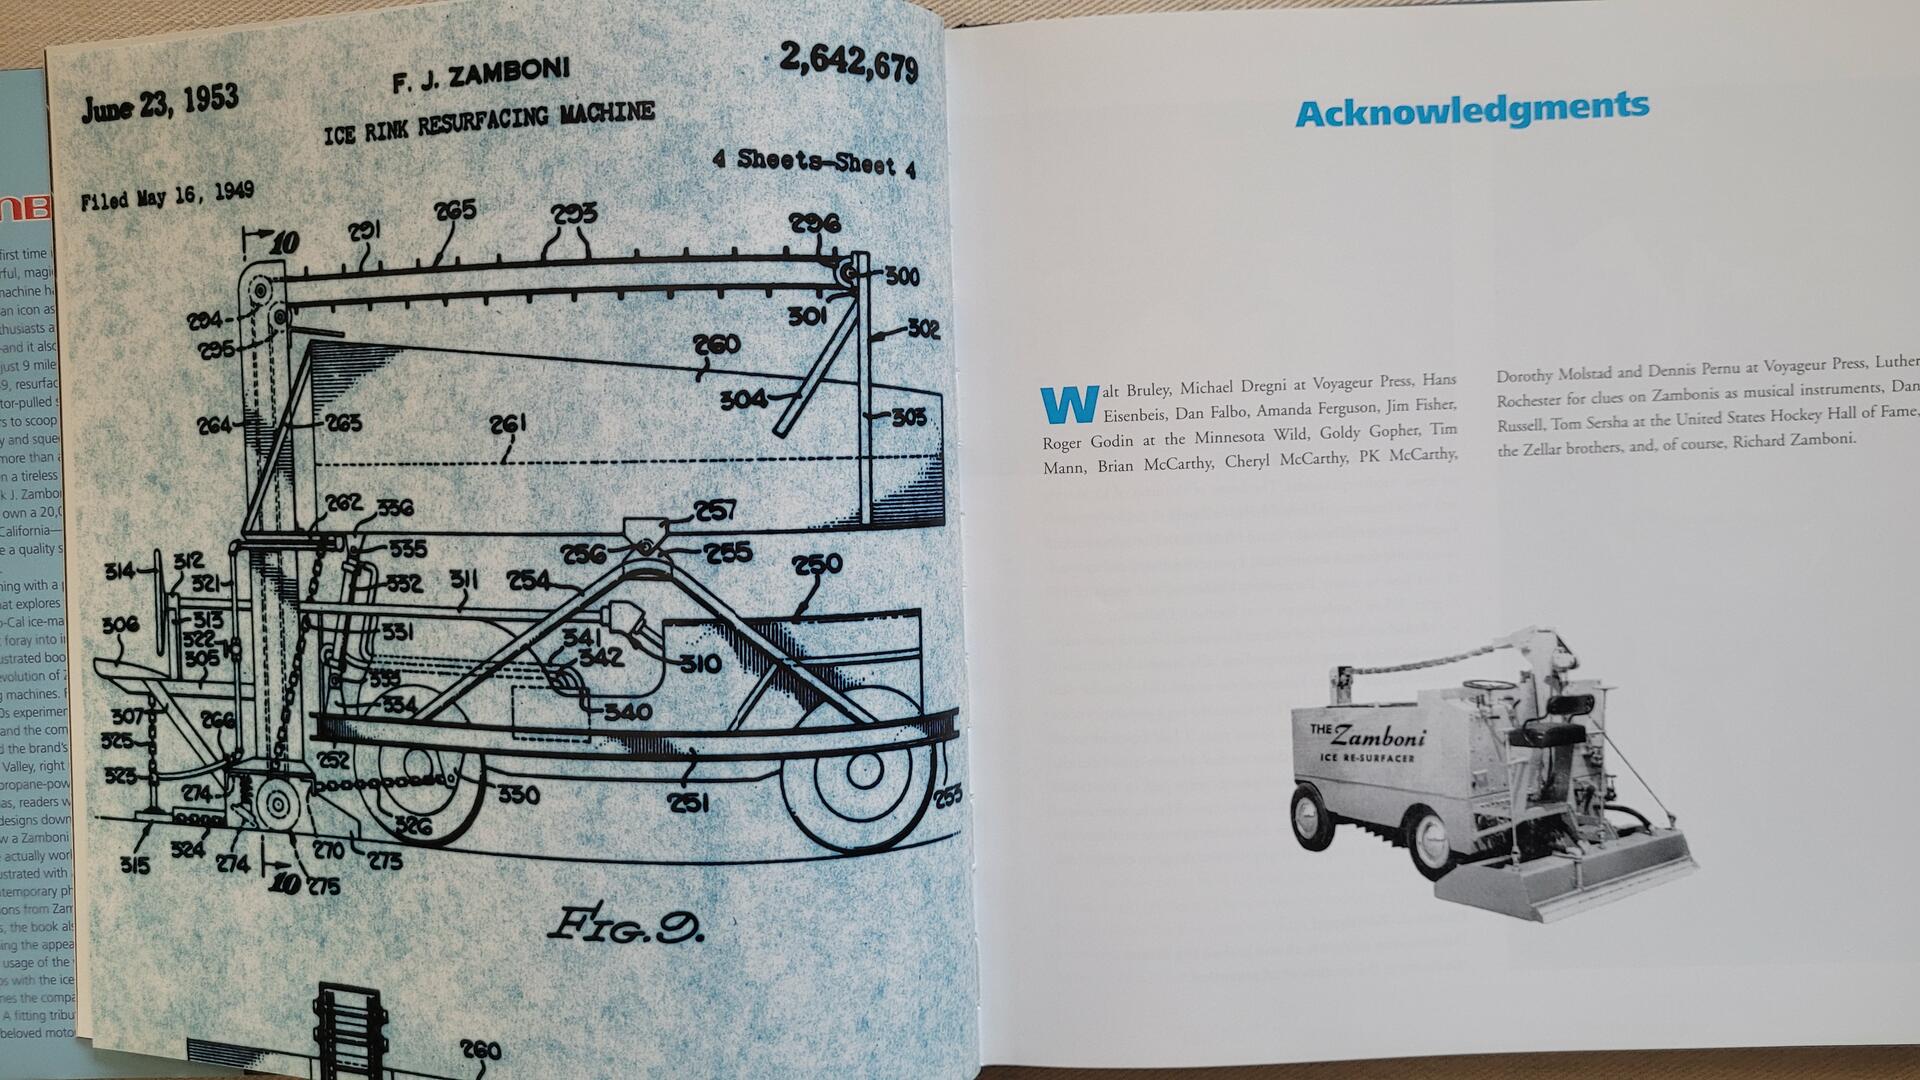 Zamboni: The Coolest Machines on Ice Book by Eric Dregni ISBN 9780760324394 128 pages Quarto Publishing Group USA.